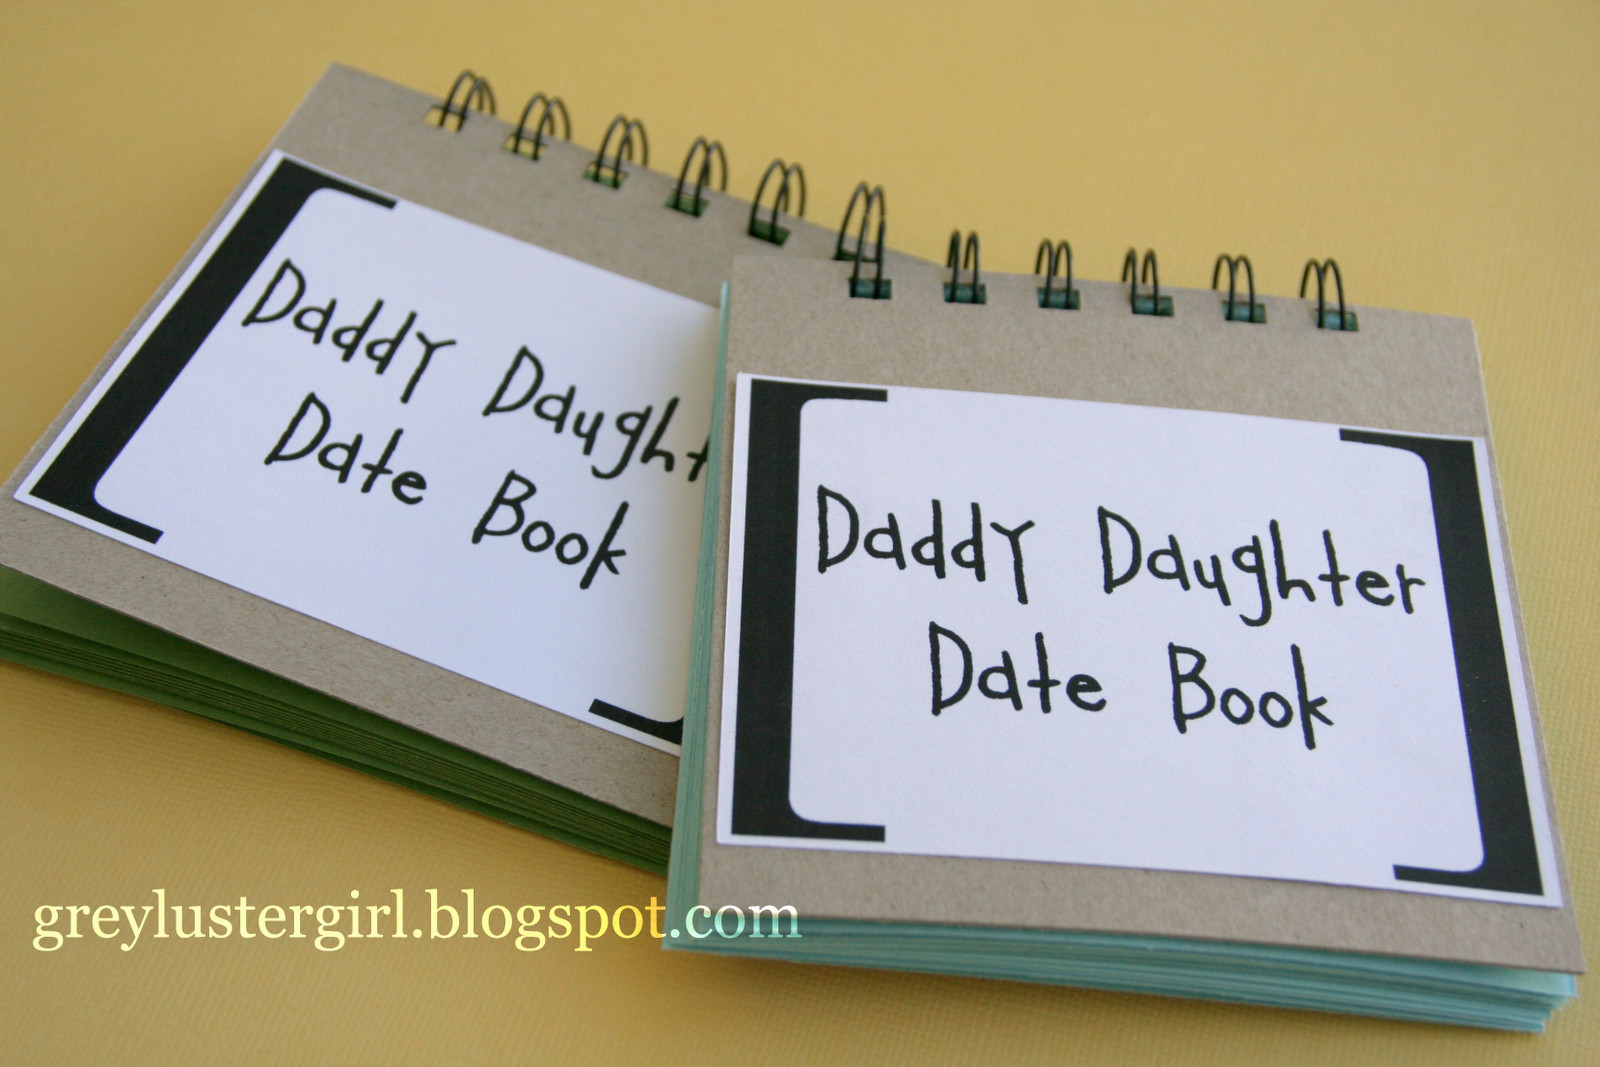 Daddy Daughter Fathers Day Gifts
 Daddy Daughter Date Book